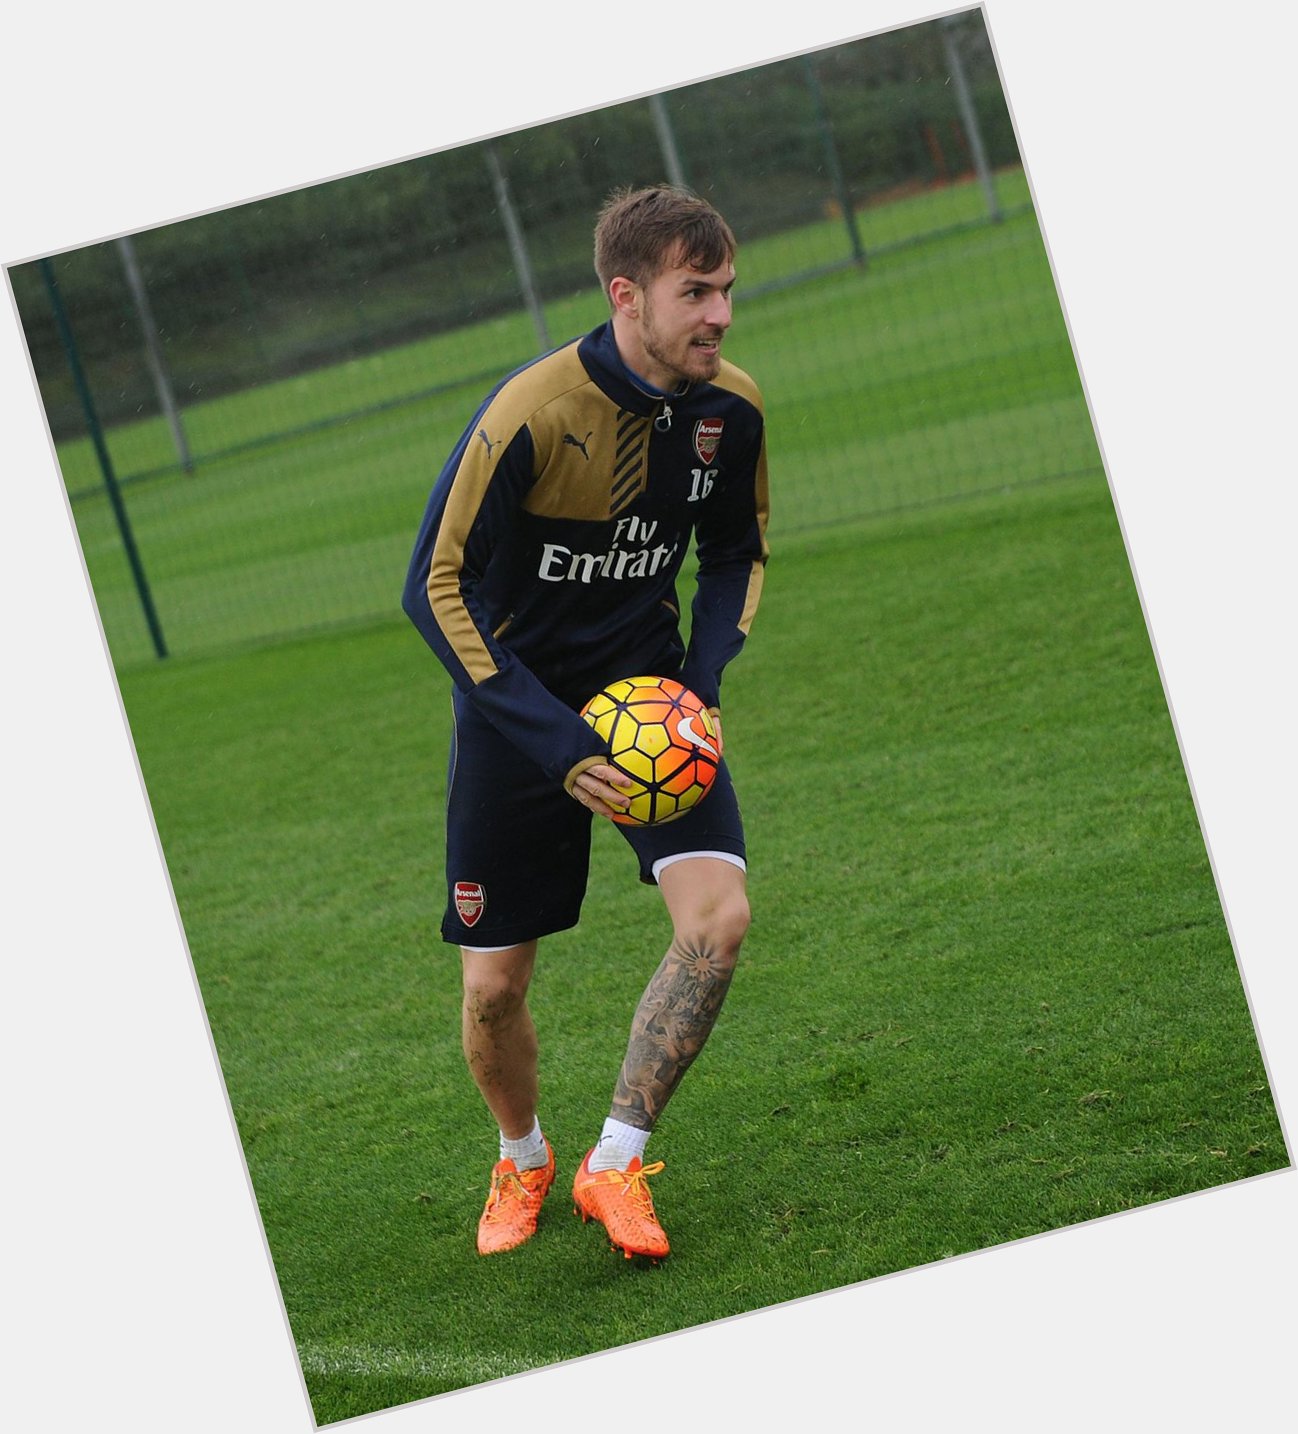 Happy Birthday Aaron Ramsey...... we hope to assist you with a 3points az birthday gift tonight 